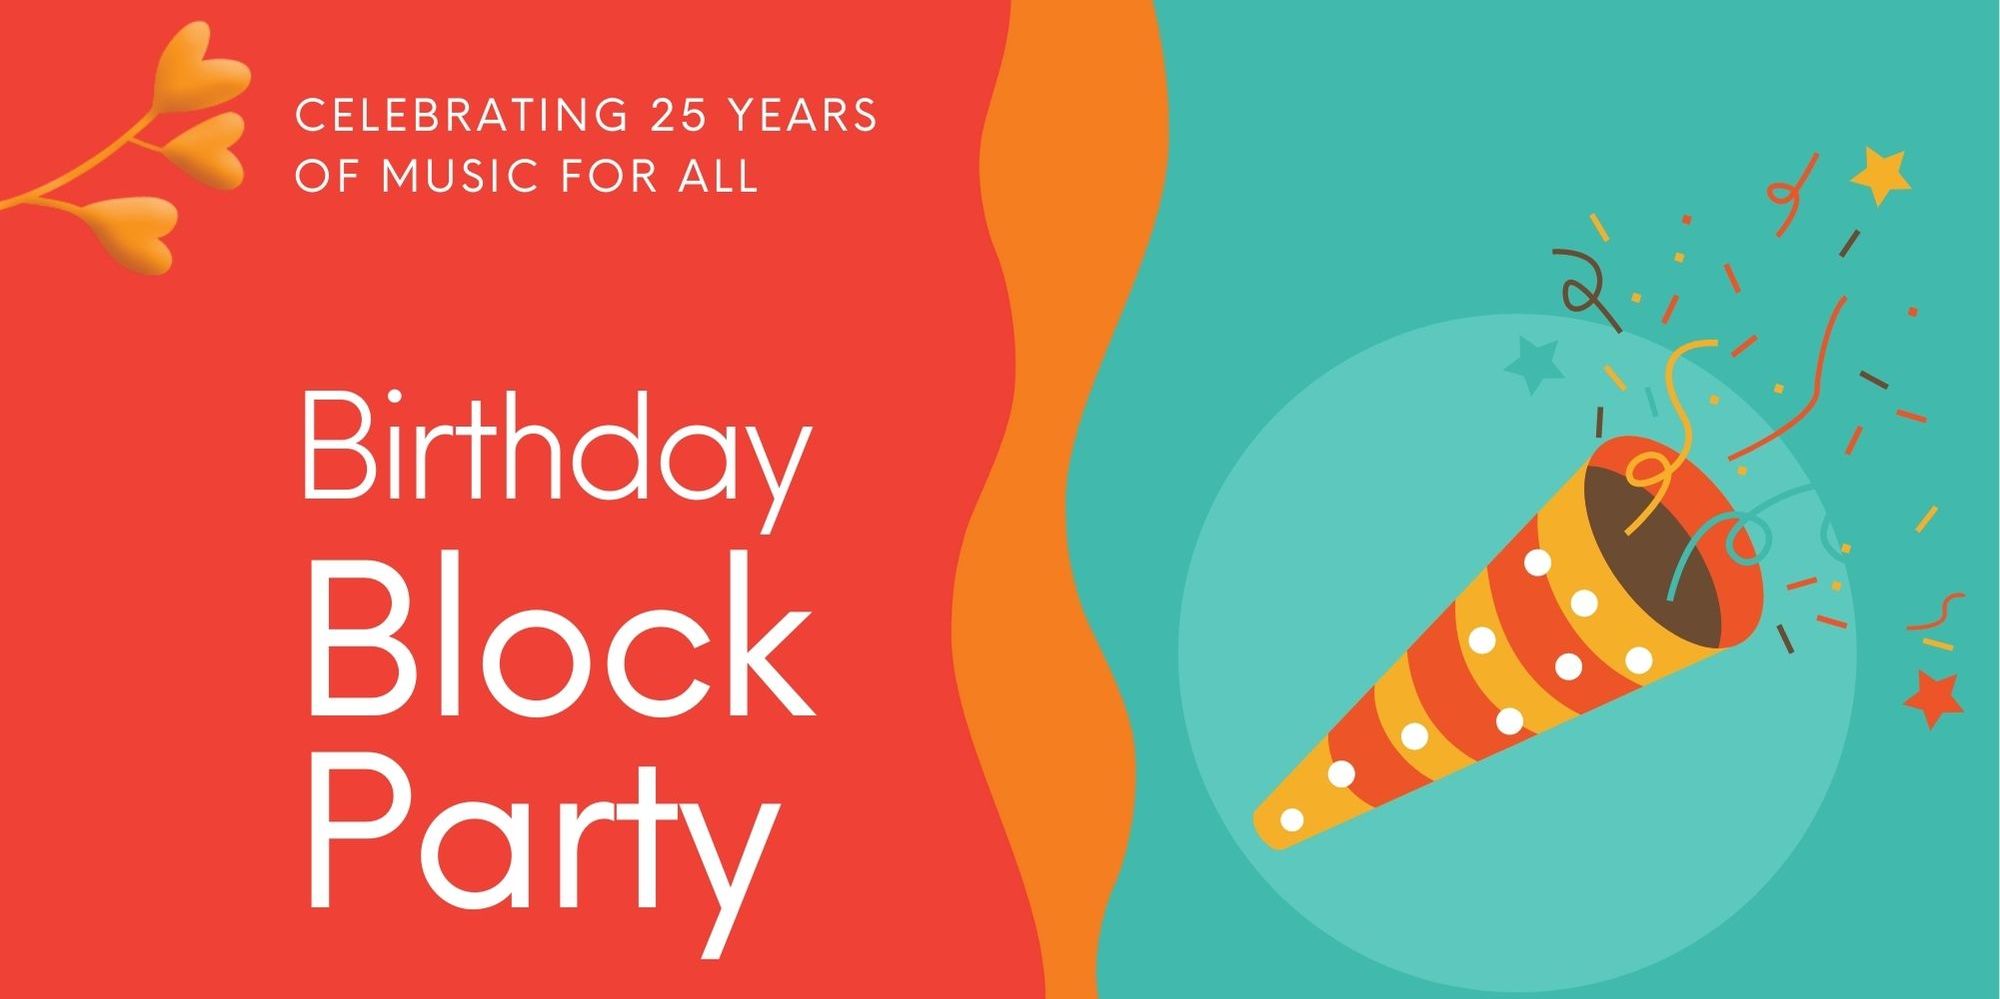 Center for Musical Arts: Birthday Block Party promotional image